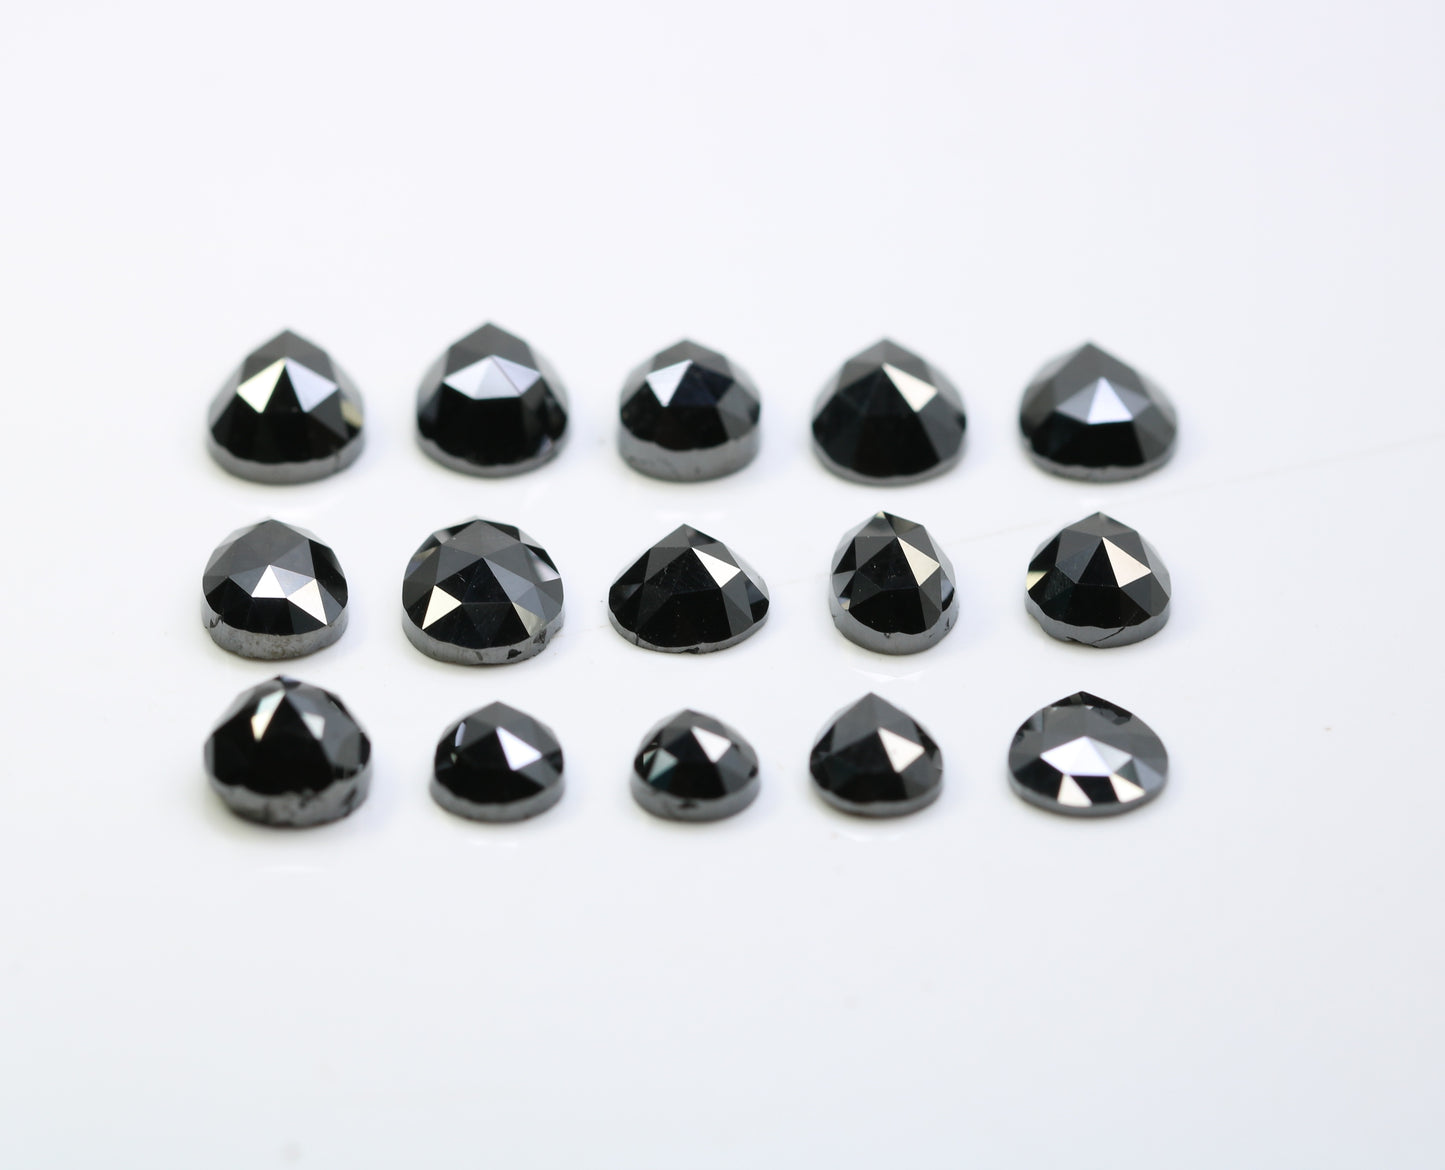 0.59 CT To 1.53 CT Black Pear Shape Natural Loose Diamond For Engagement Ring